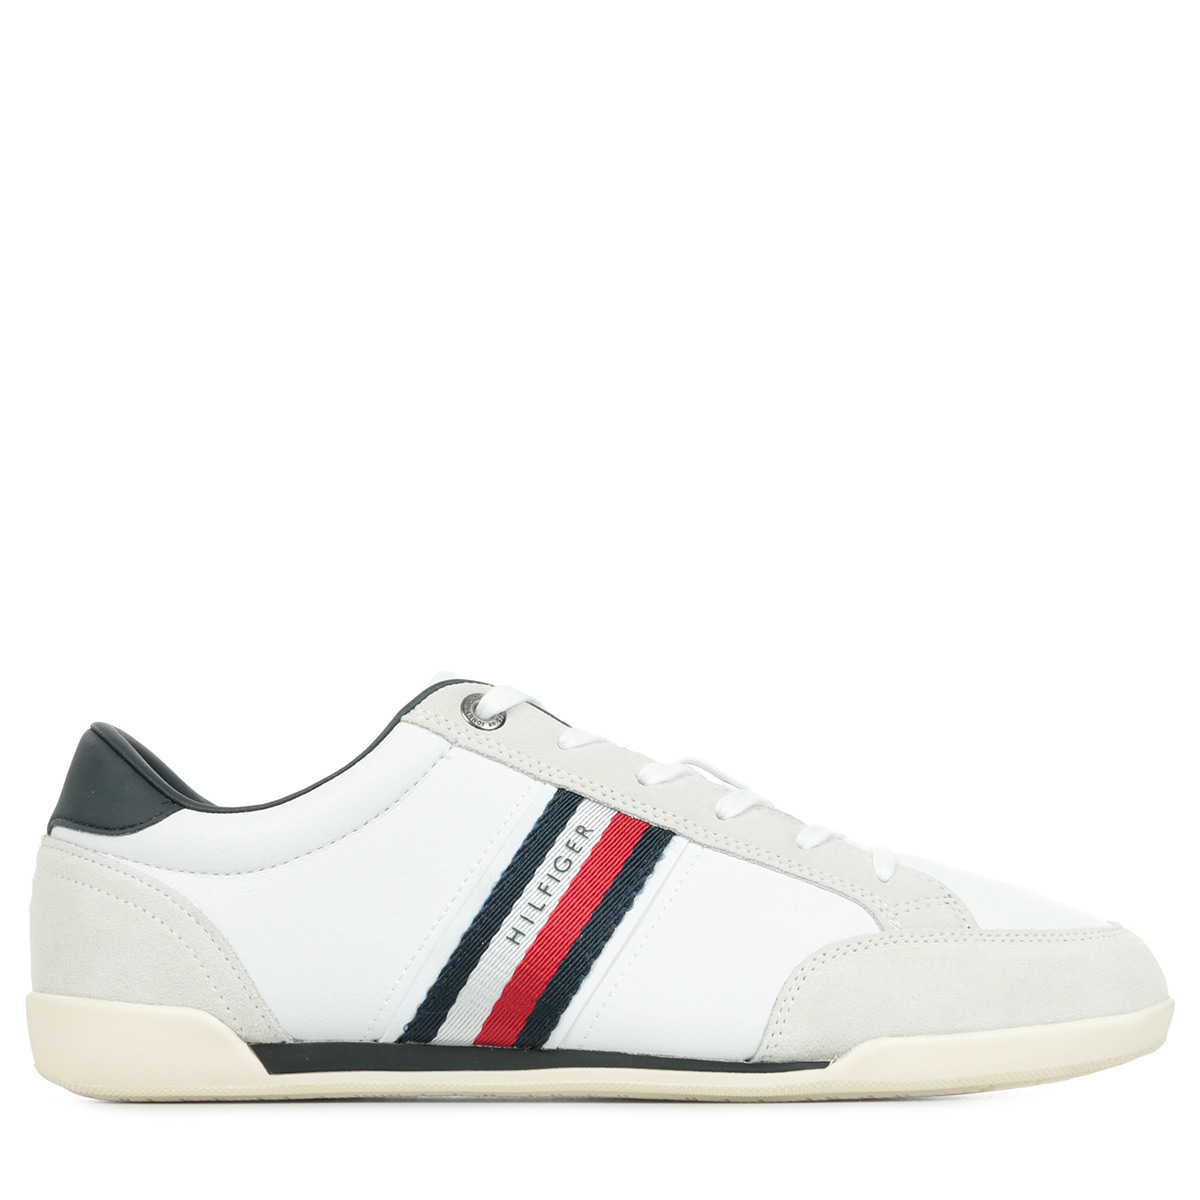 Tommy Hilfiger "Corporate Material Mix Leather"